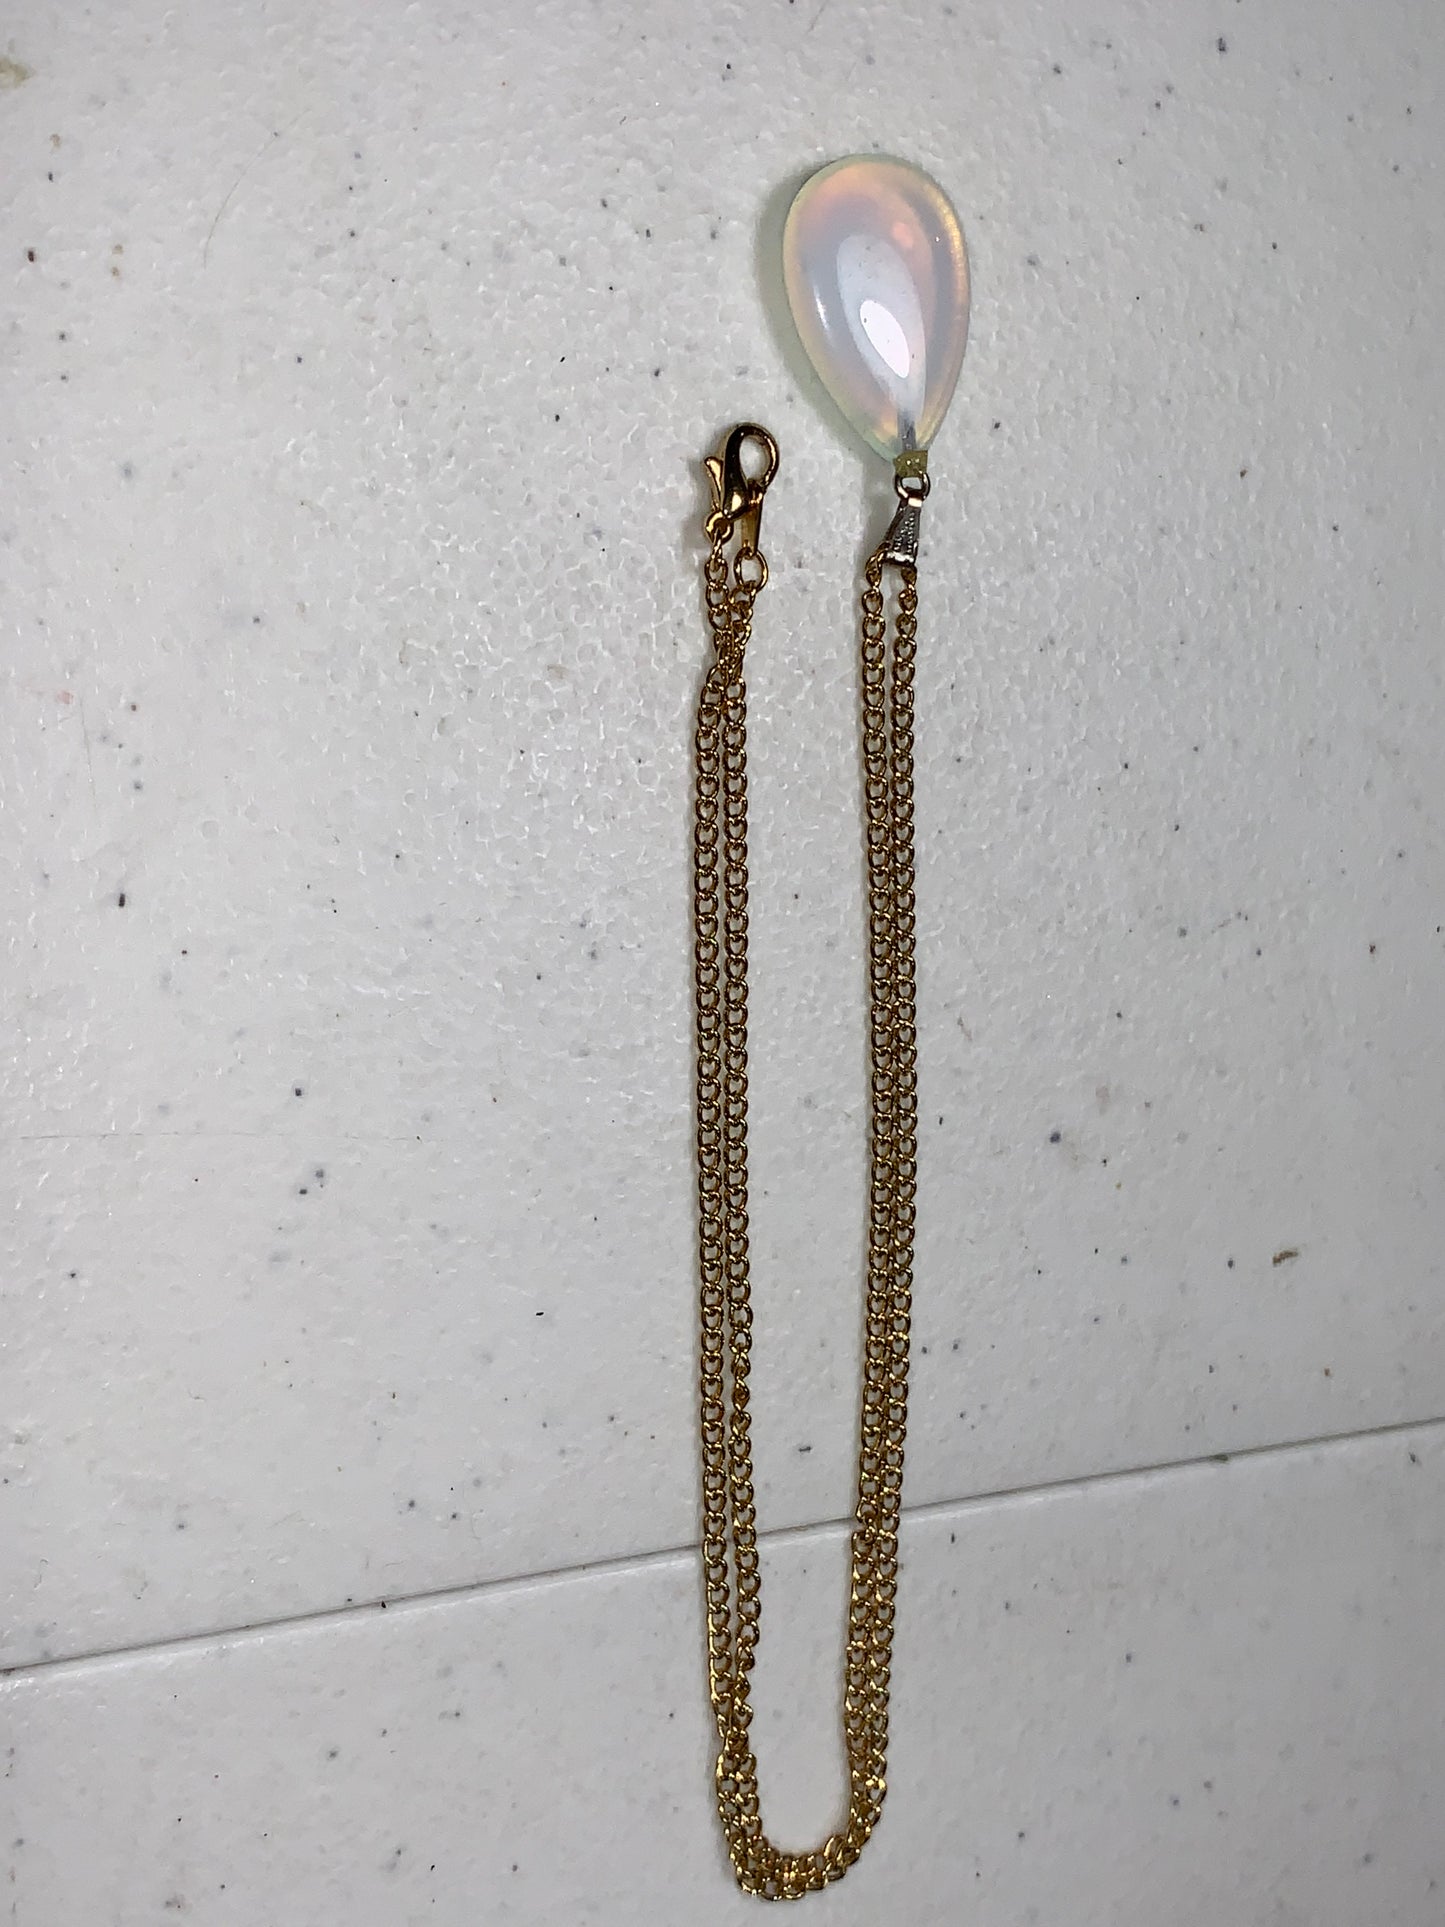 18" Gold Tone Necklace with Opalite Pendant